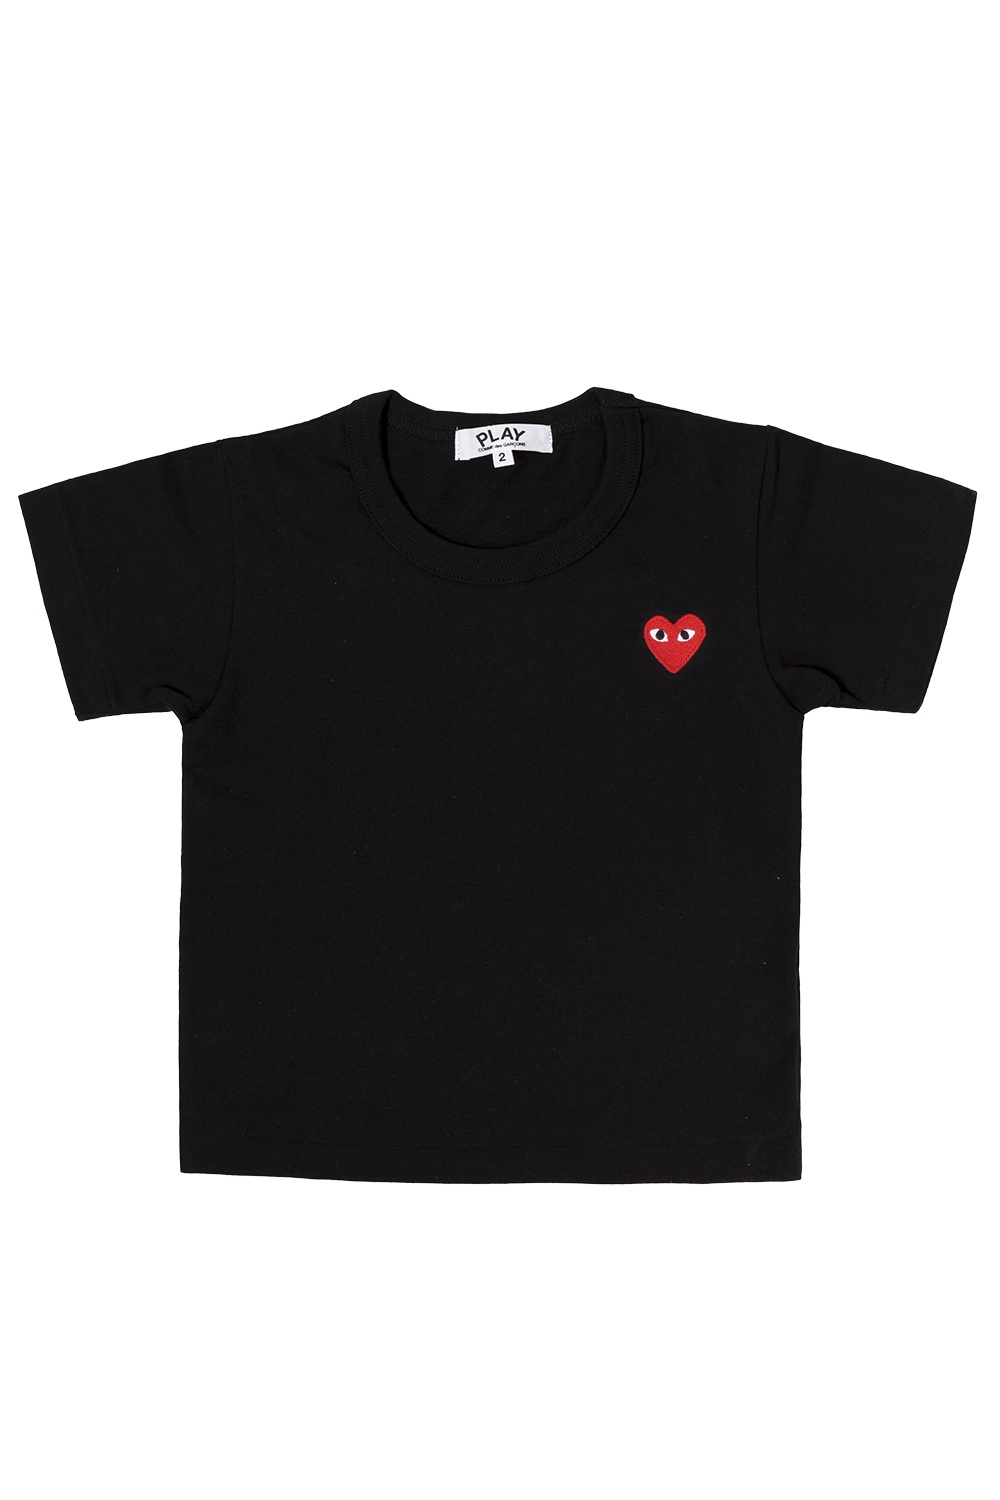 shirt short the north face red box preto Patched T-shirt